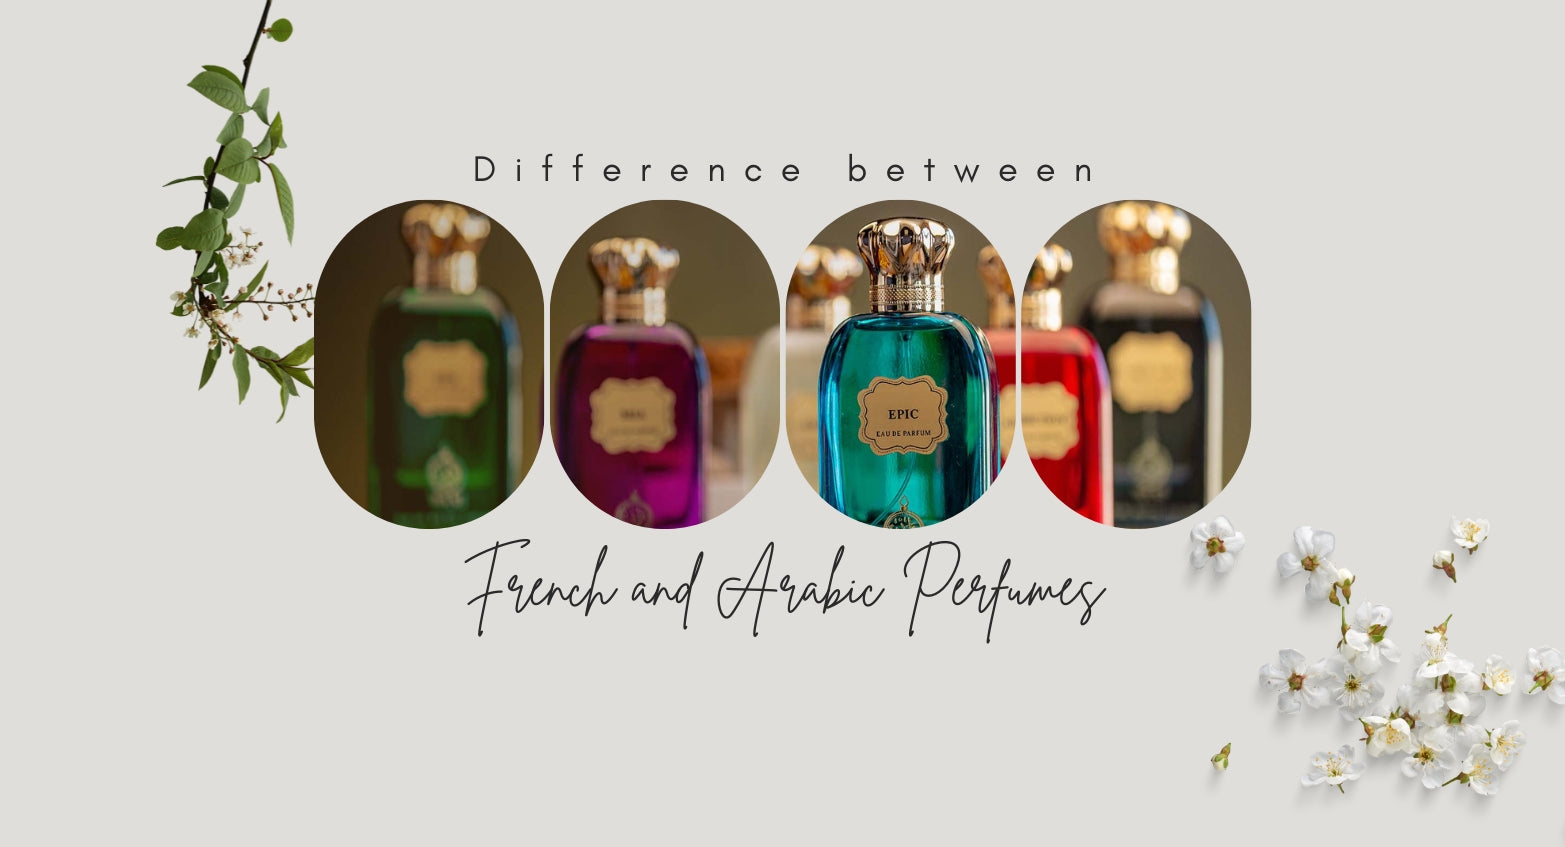 Difference between French and Arabic Perfumes